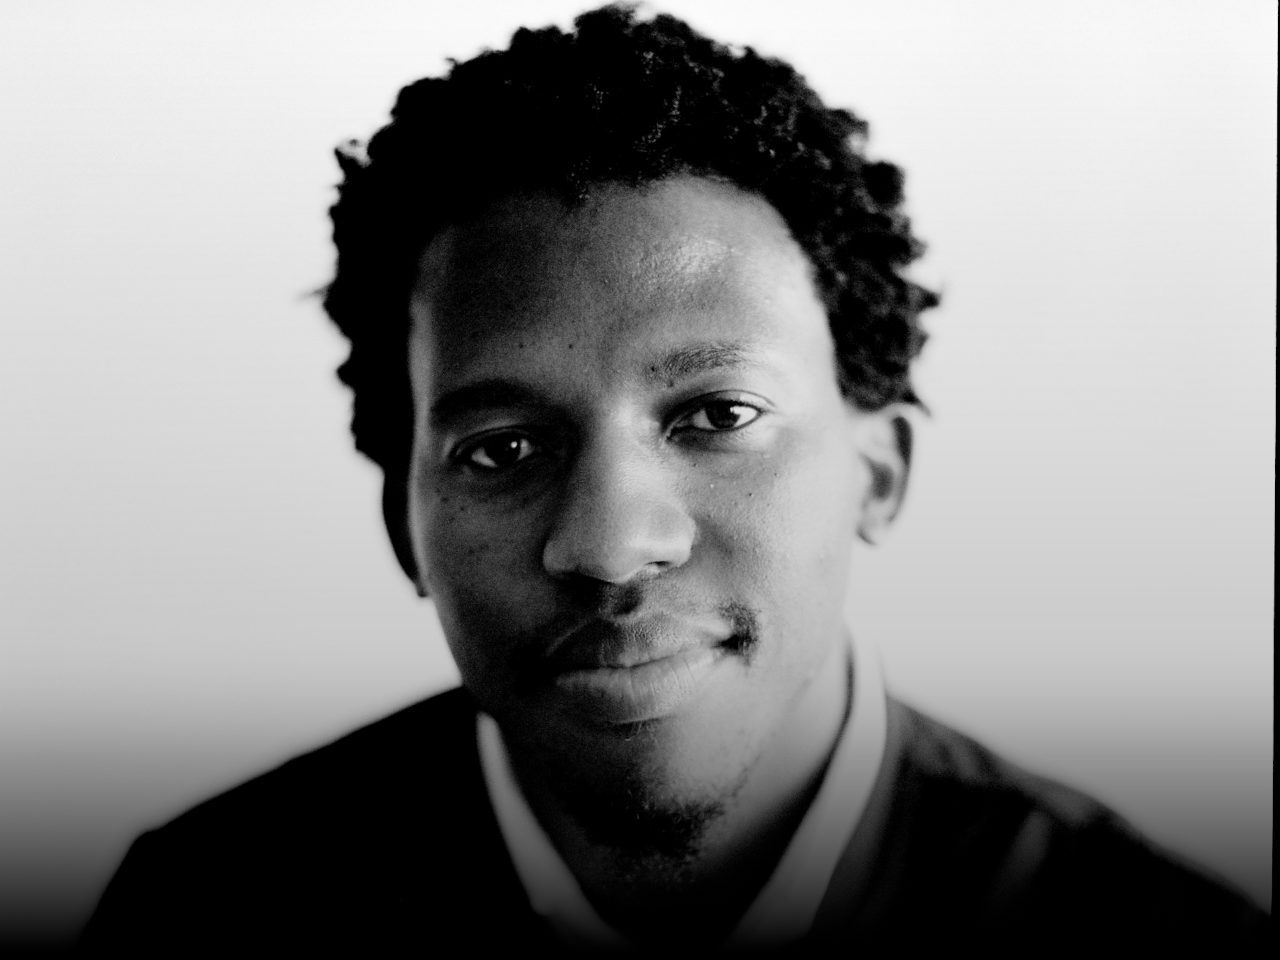 Nkanyezi Masango, group executive creative director, King James (Part of Accenture Interactive) is part of the direct outdoor jury